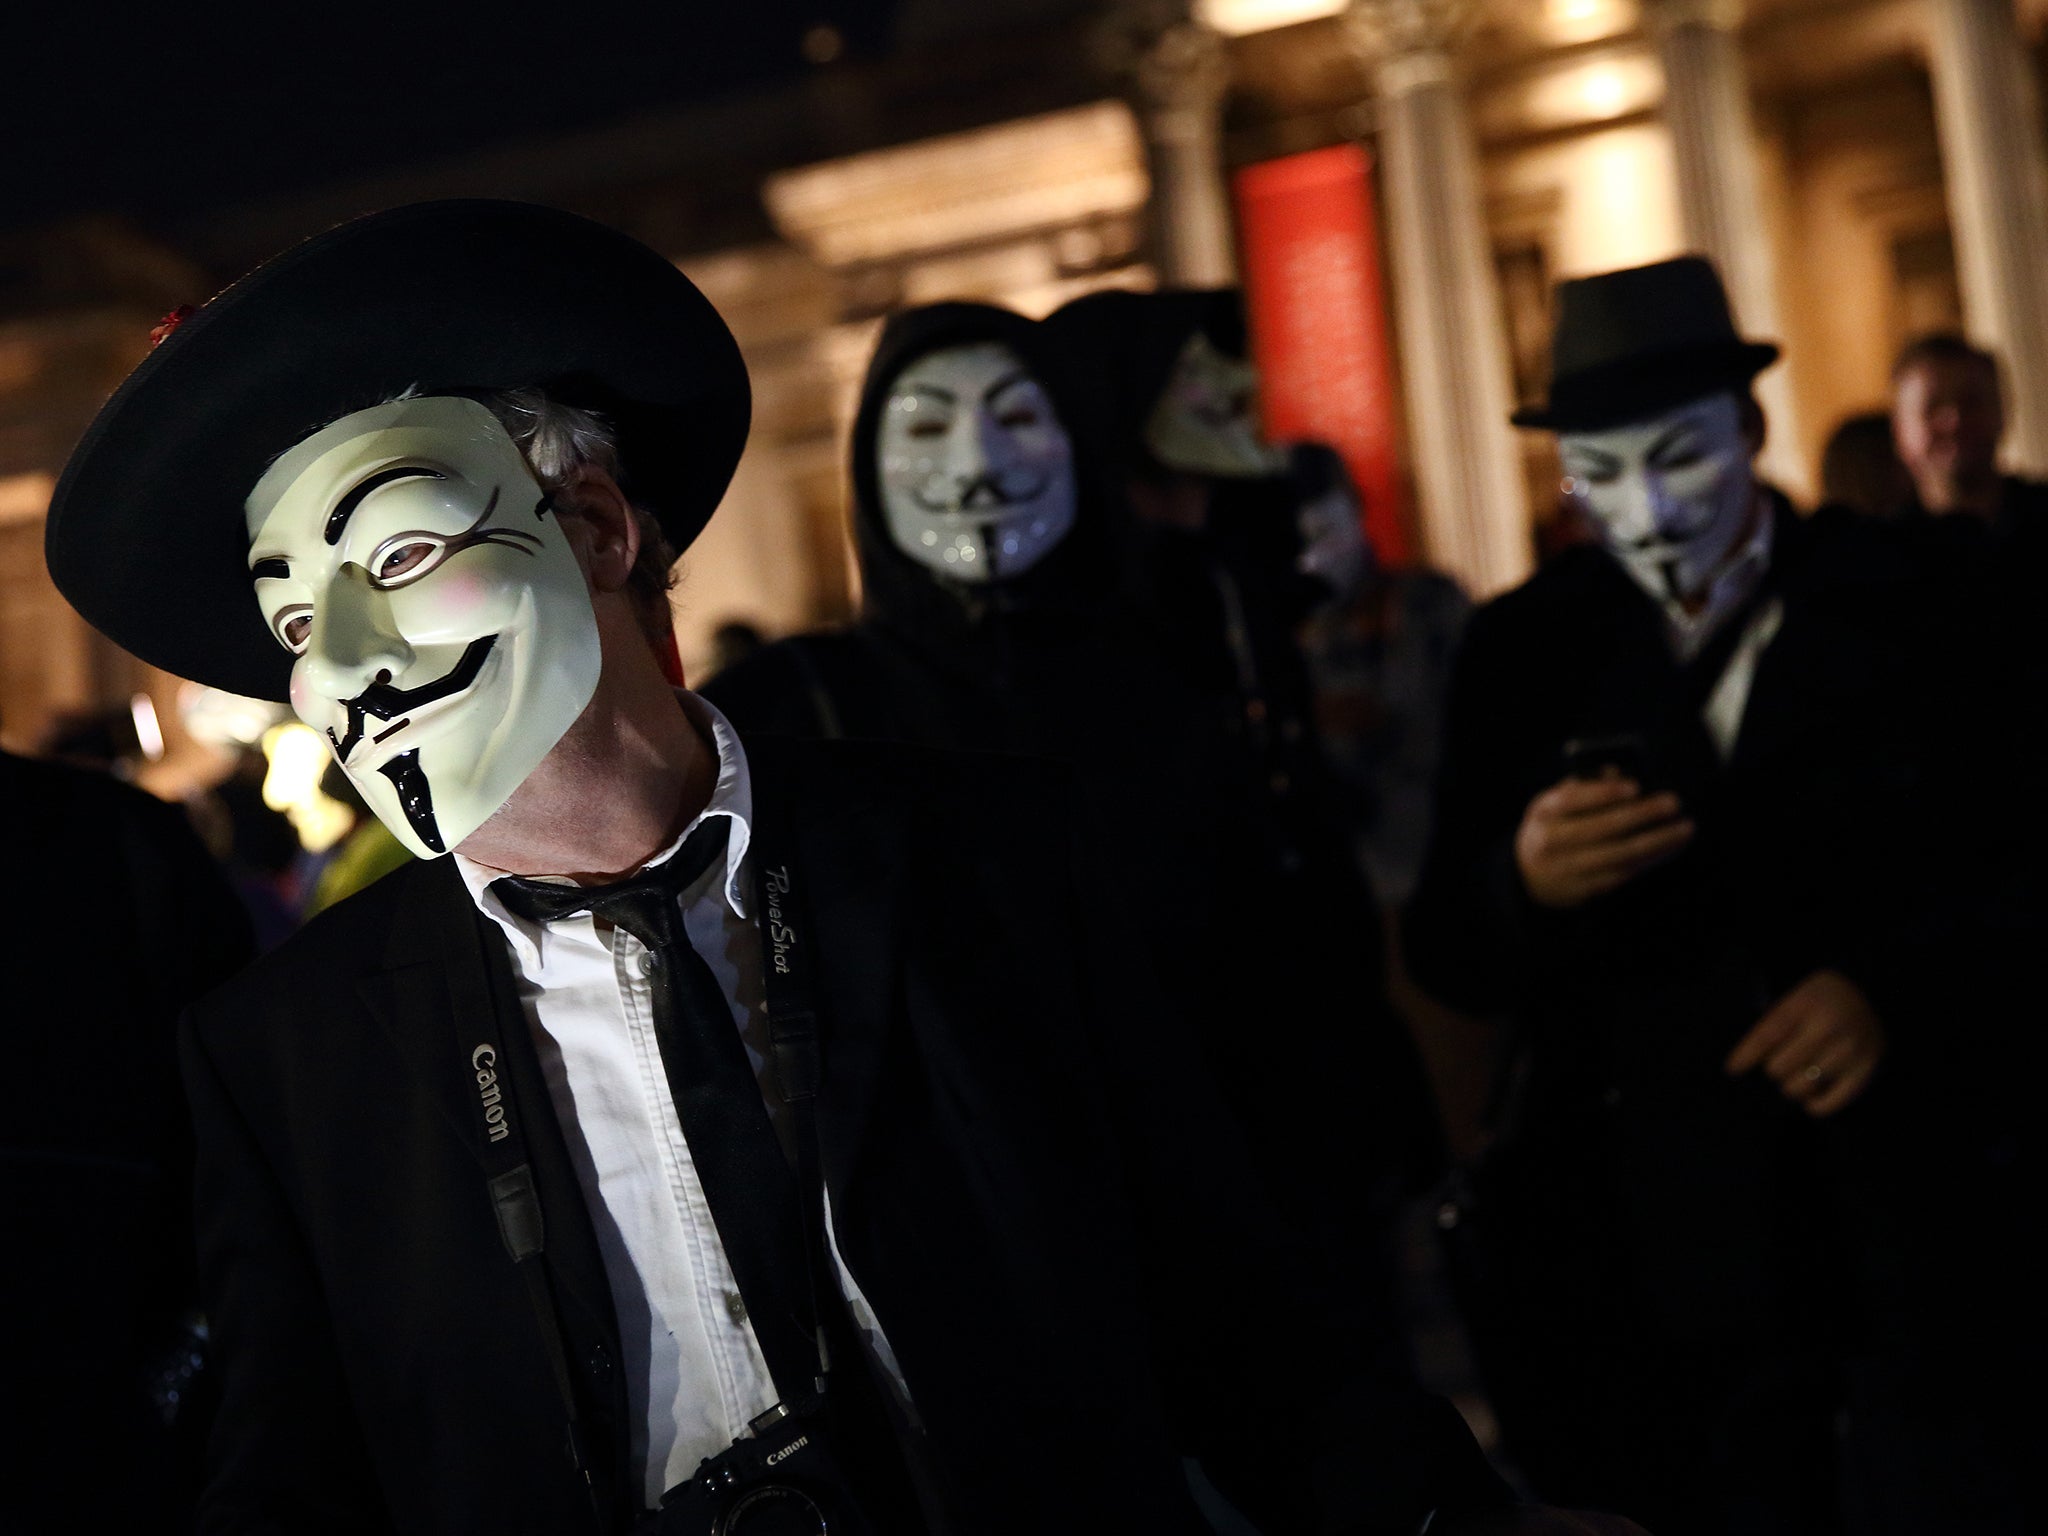 Protestors with covered faces marched from Trafalgar Square to Parliament Square and then around the streets of London in protest against austerity, mass surveillance and attacks on human rights  